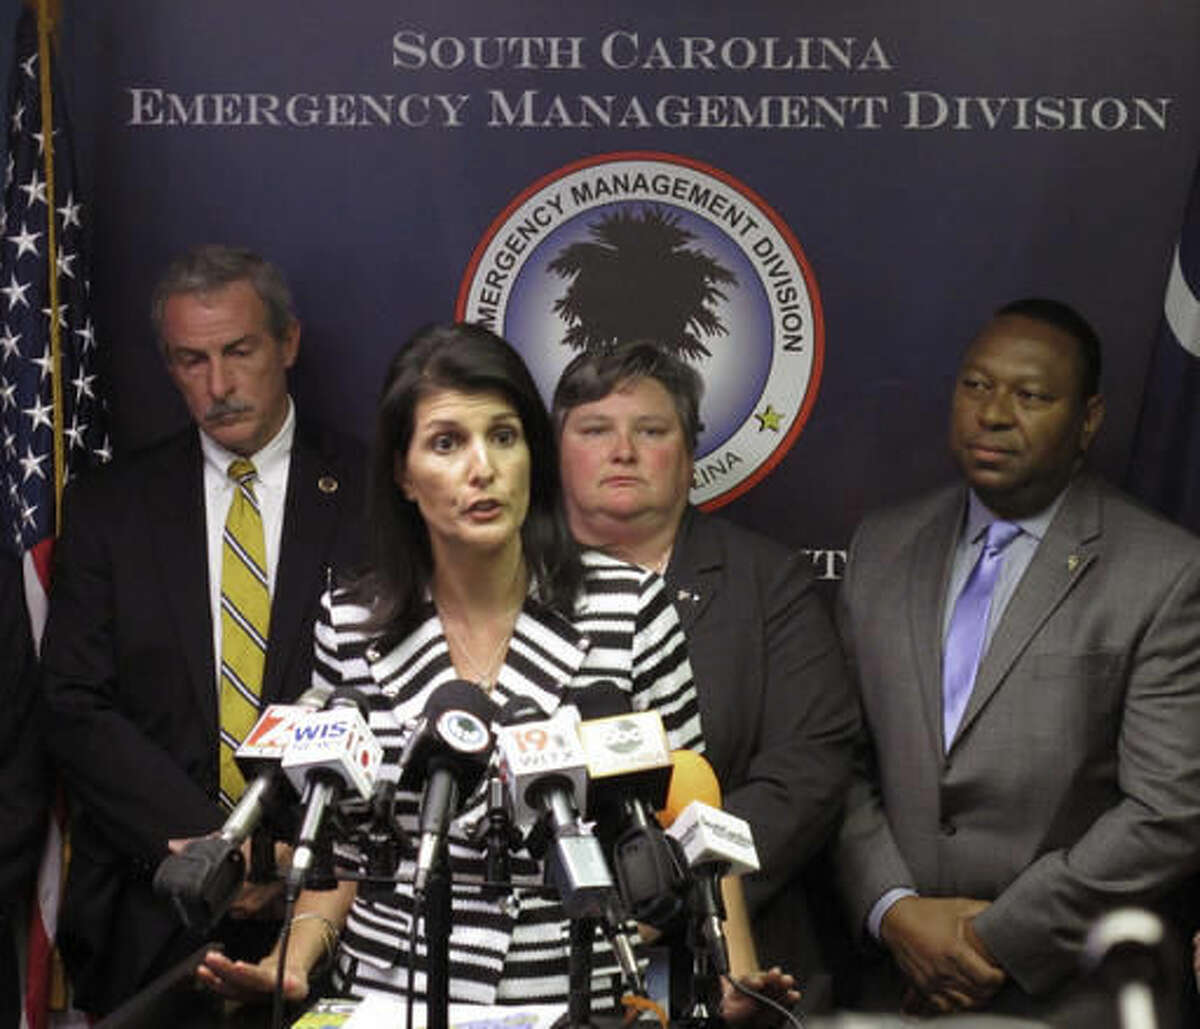 Gov. Nikki Haley announces that she plans to call for the evacuation of about 1 million people from South Carolina's coast as Hurricane Matthew threatens on Tuesday, Oct. 4, 2016, at the South Carolina Emergency Management Division headquarters in Pine Ridge, S.C. People along the East Coast entered better-safe-than-sorry mode Tuesday, flocking to hardware stores, grocery aisles and gas stations as Hurricane Matthew marched toward Florida, threatening to become the first hurricane to hit the state's Atlantic coast in over a decade. (AP Photo/Jeffrey Collins)